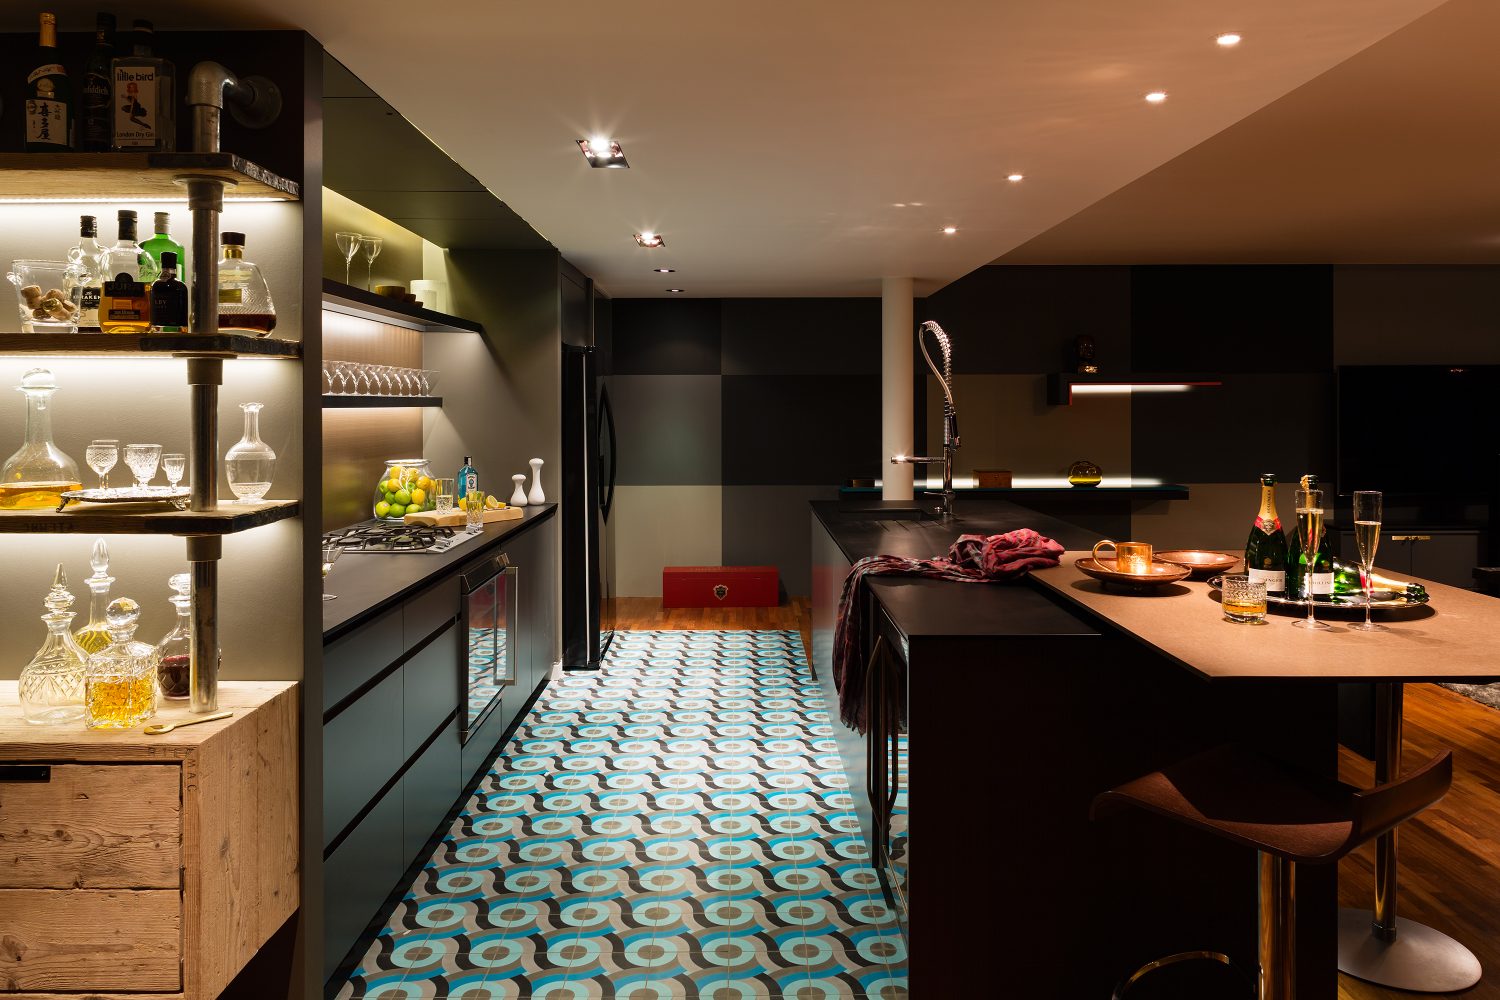 Night & Day by Daniel Hopwood – kitchen design with raw copper and cement. Penthouse interior design, London